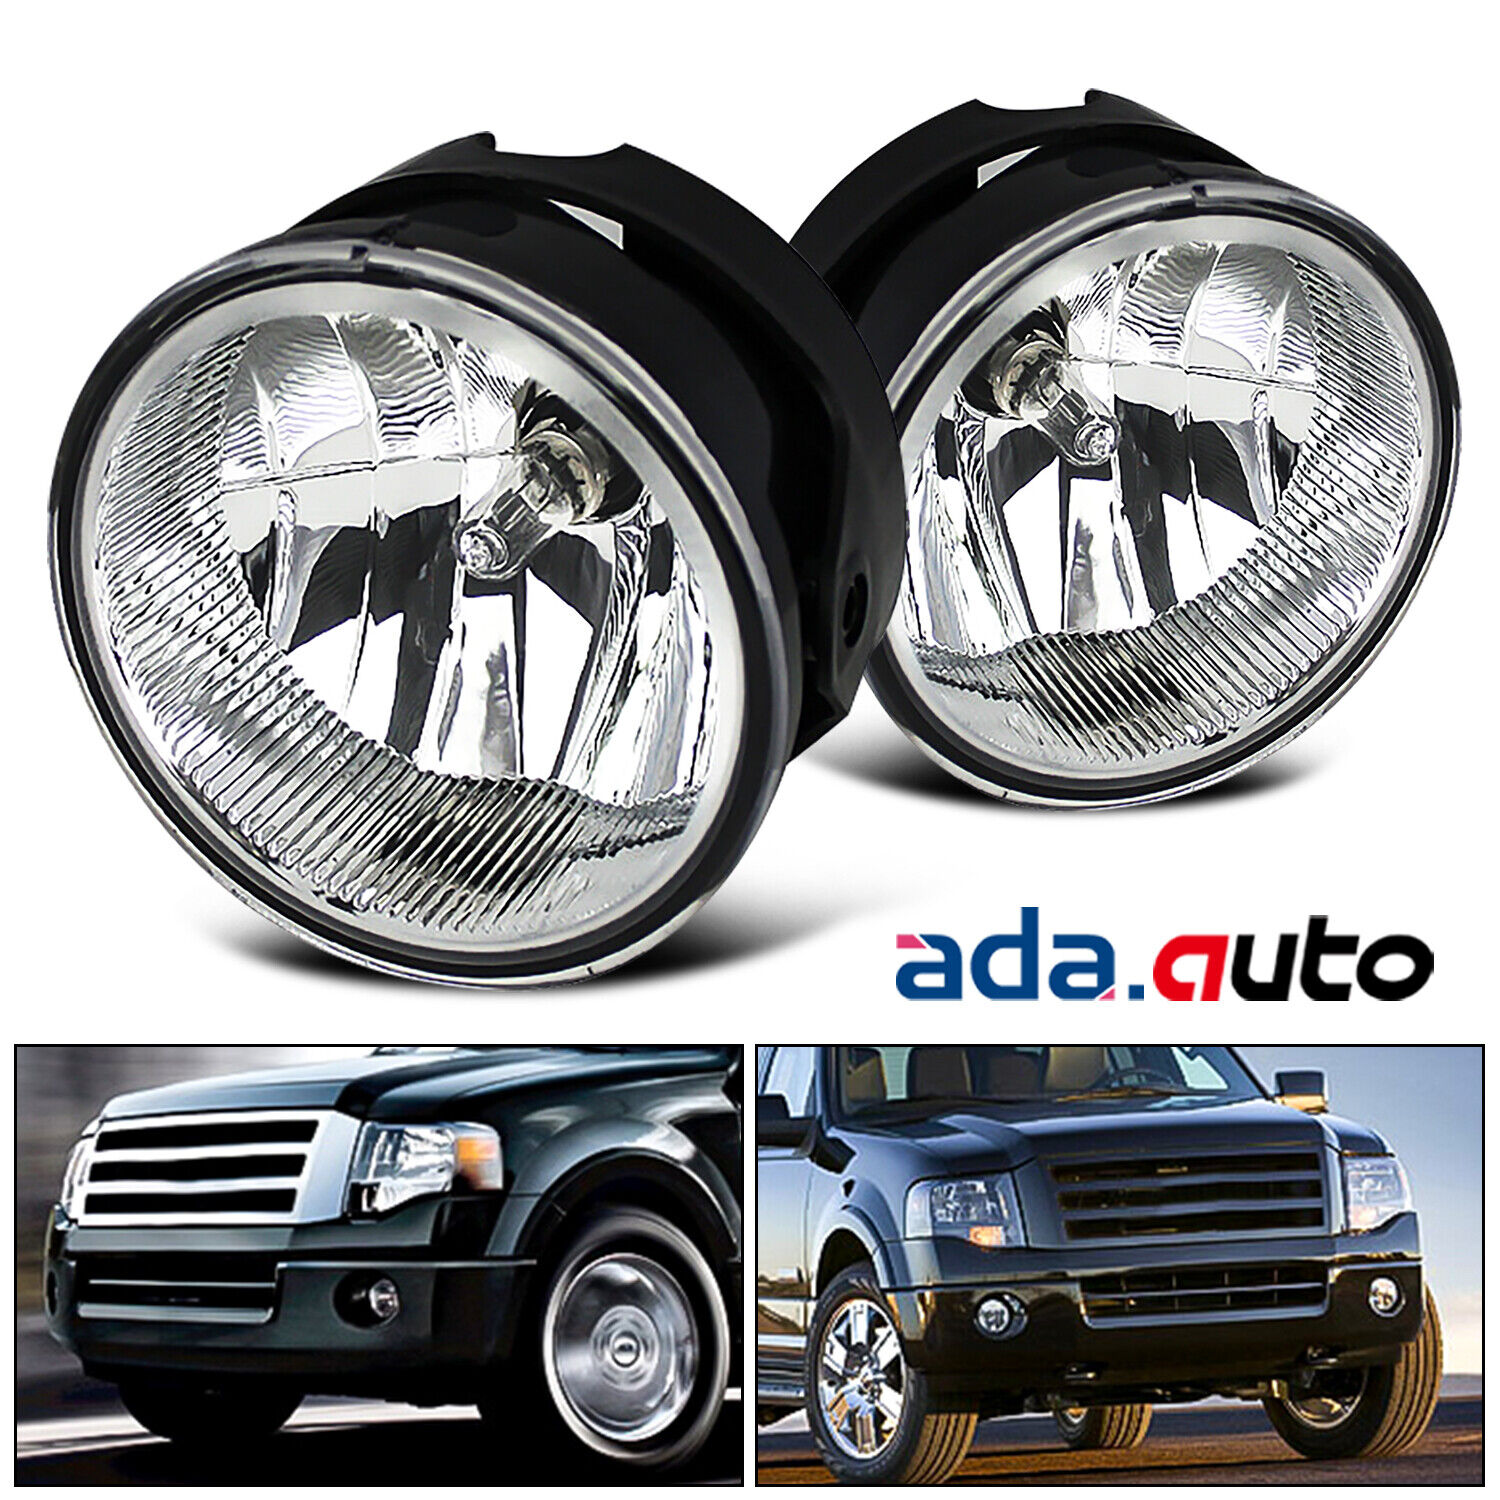 2007-2014 Ford Expedition/2008-2011 Ranger Fog Lights Bumper Lamps Pair